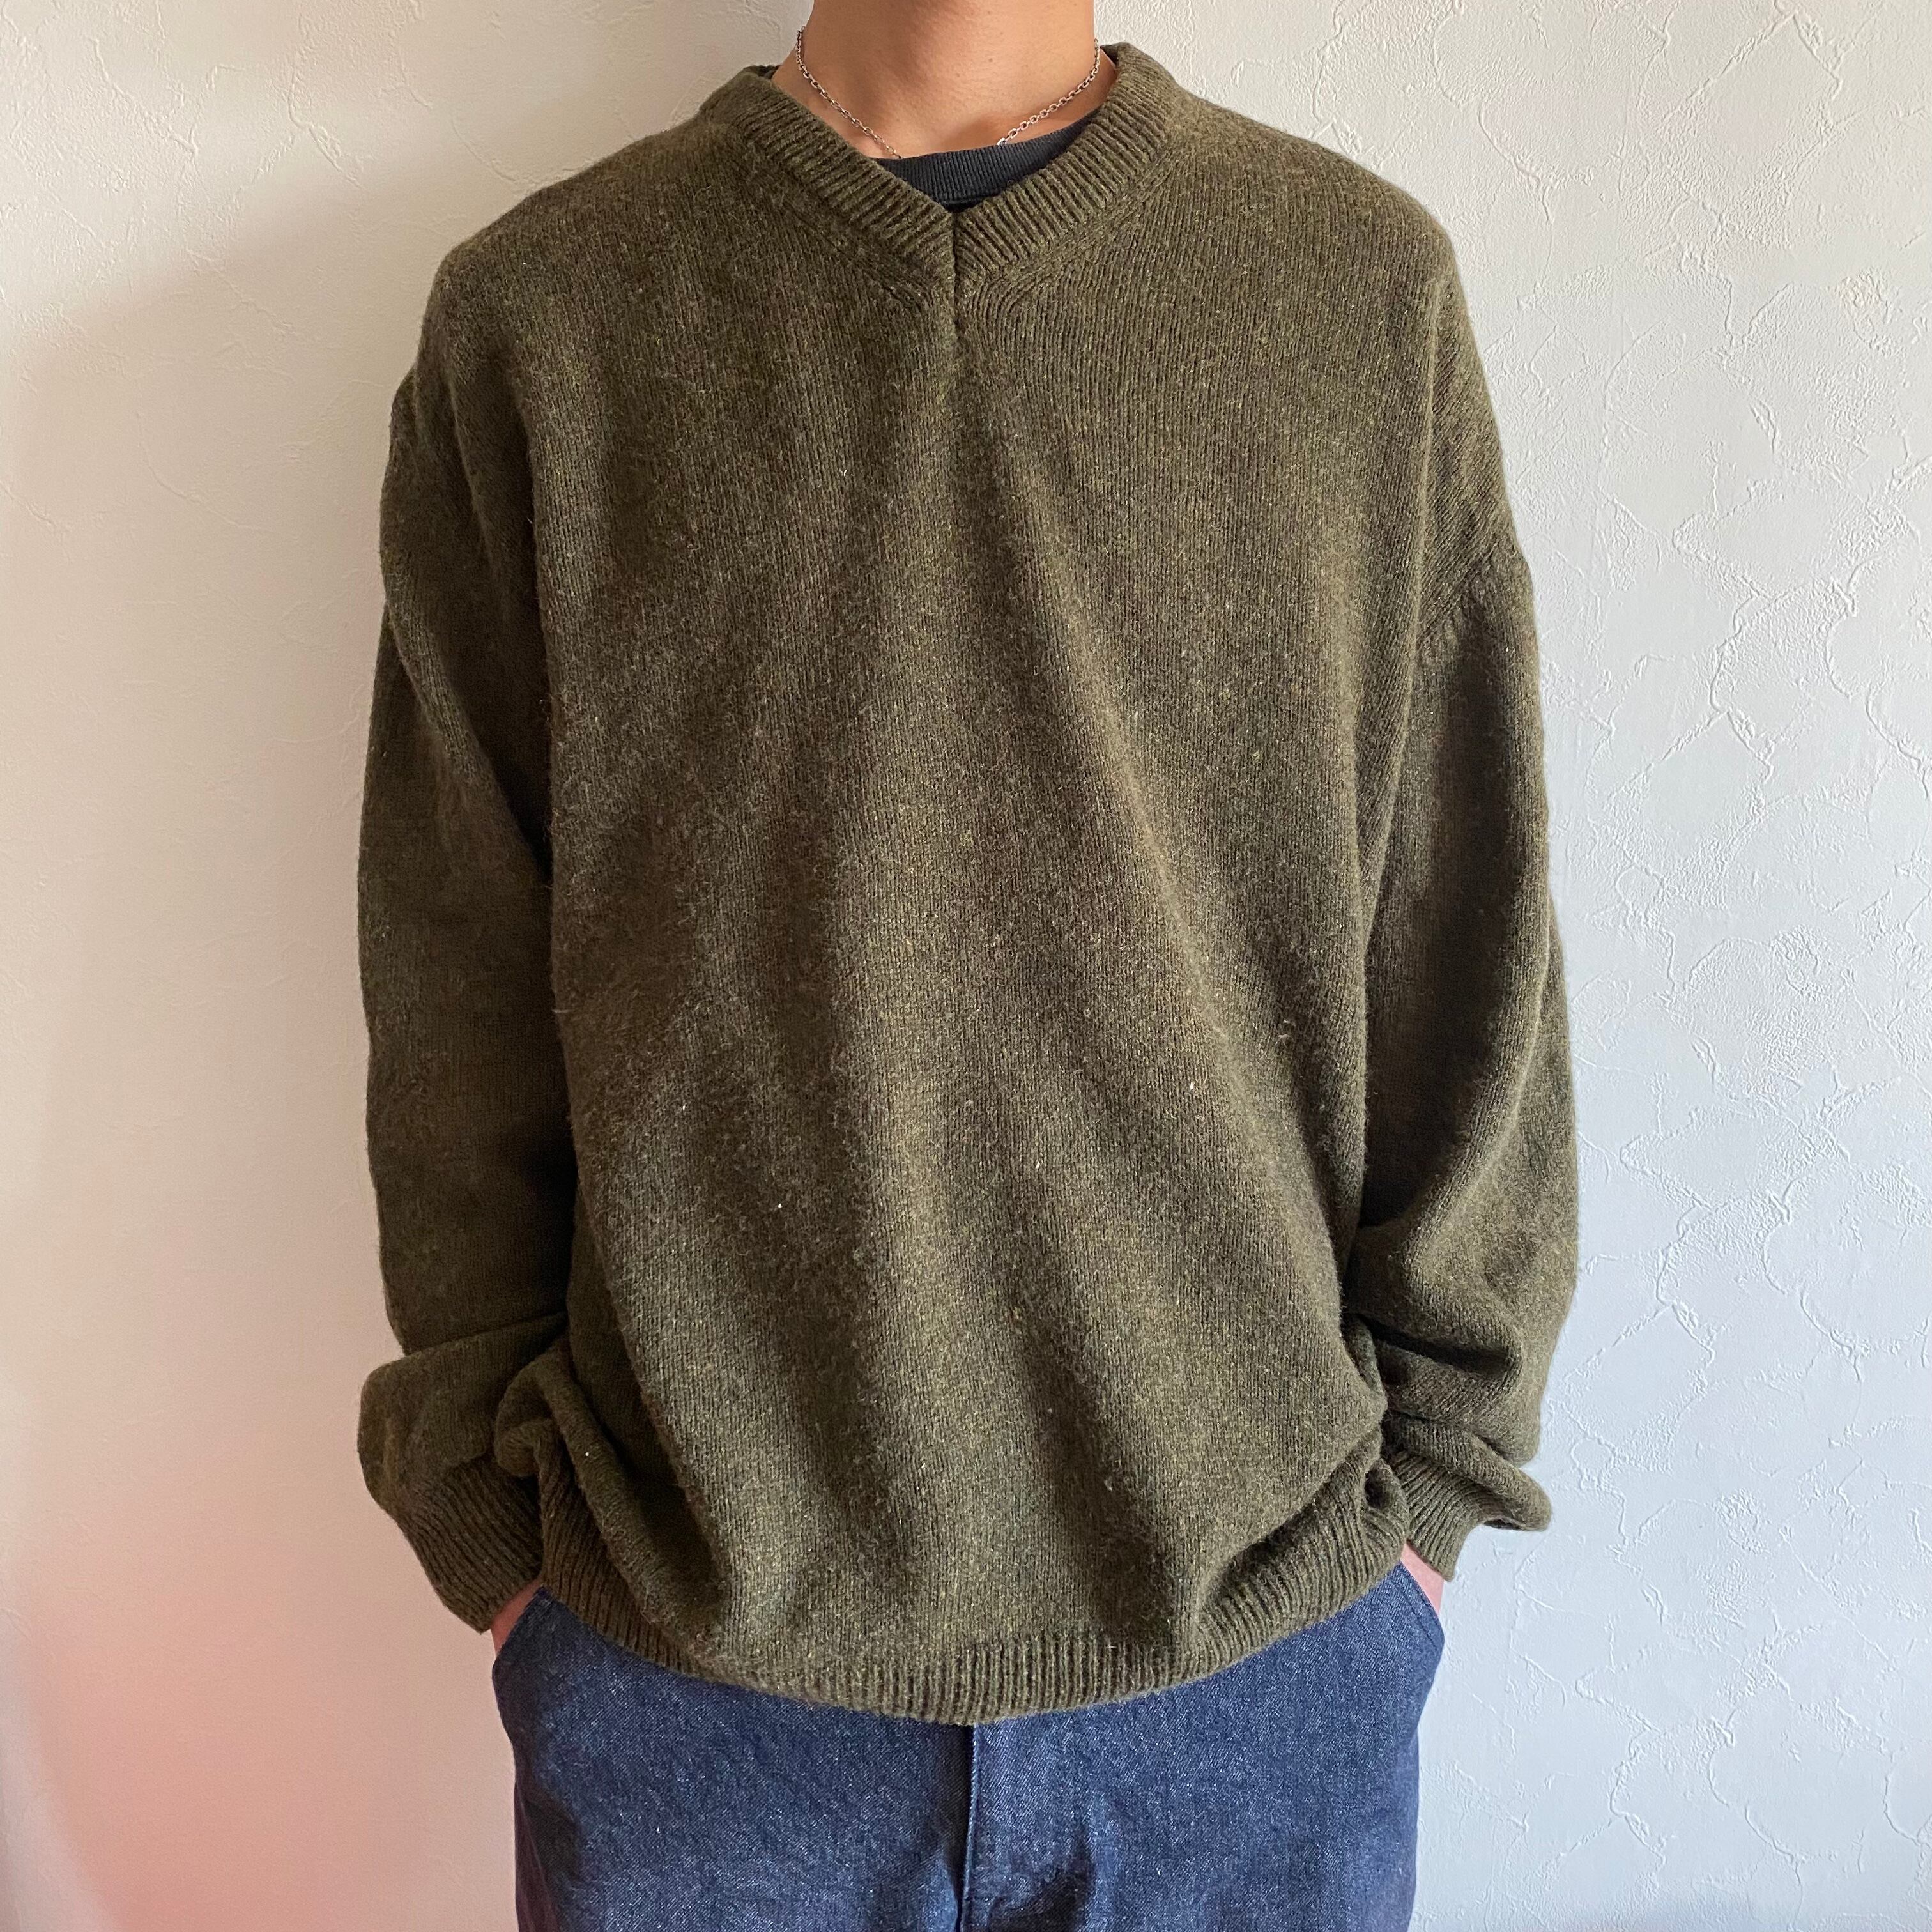 Made in ITALY COUNTY SEAT WOOL KNIT Sweater {イタリア製 COUNTY SEAT ウールニット セーター  古着 USED メンズ} ユニセックス MGarage used clothing